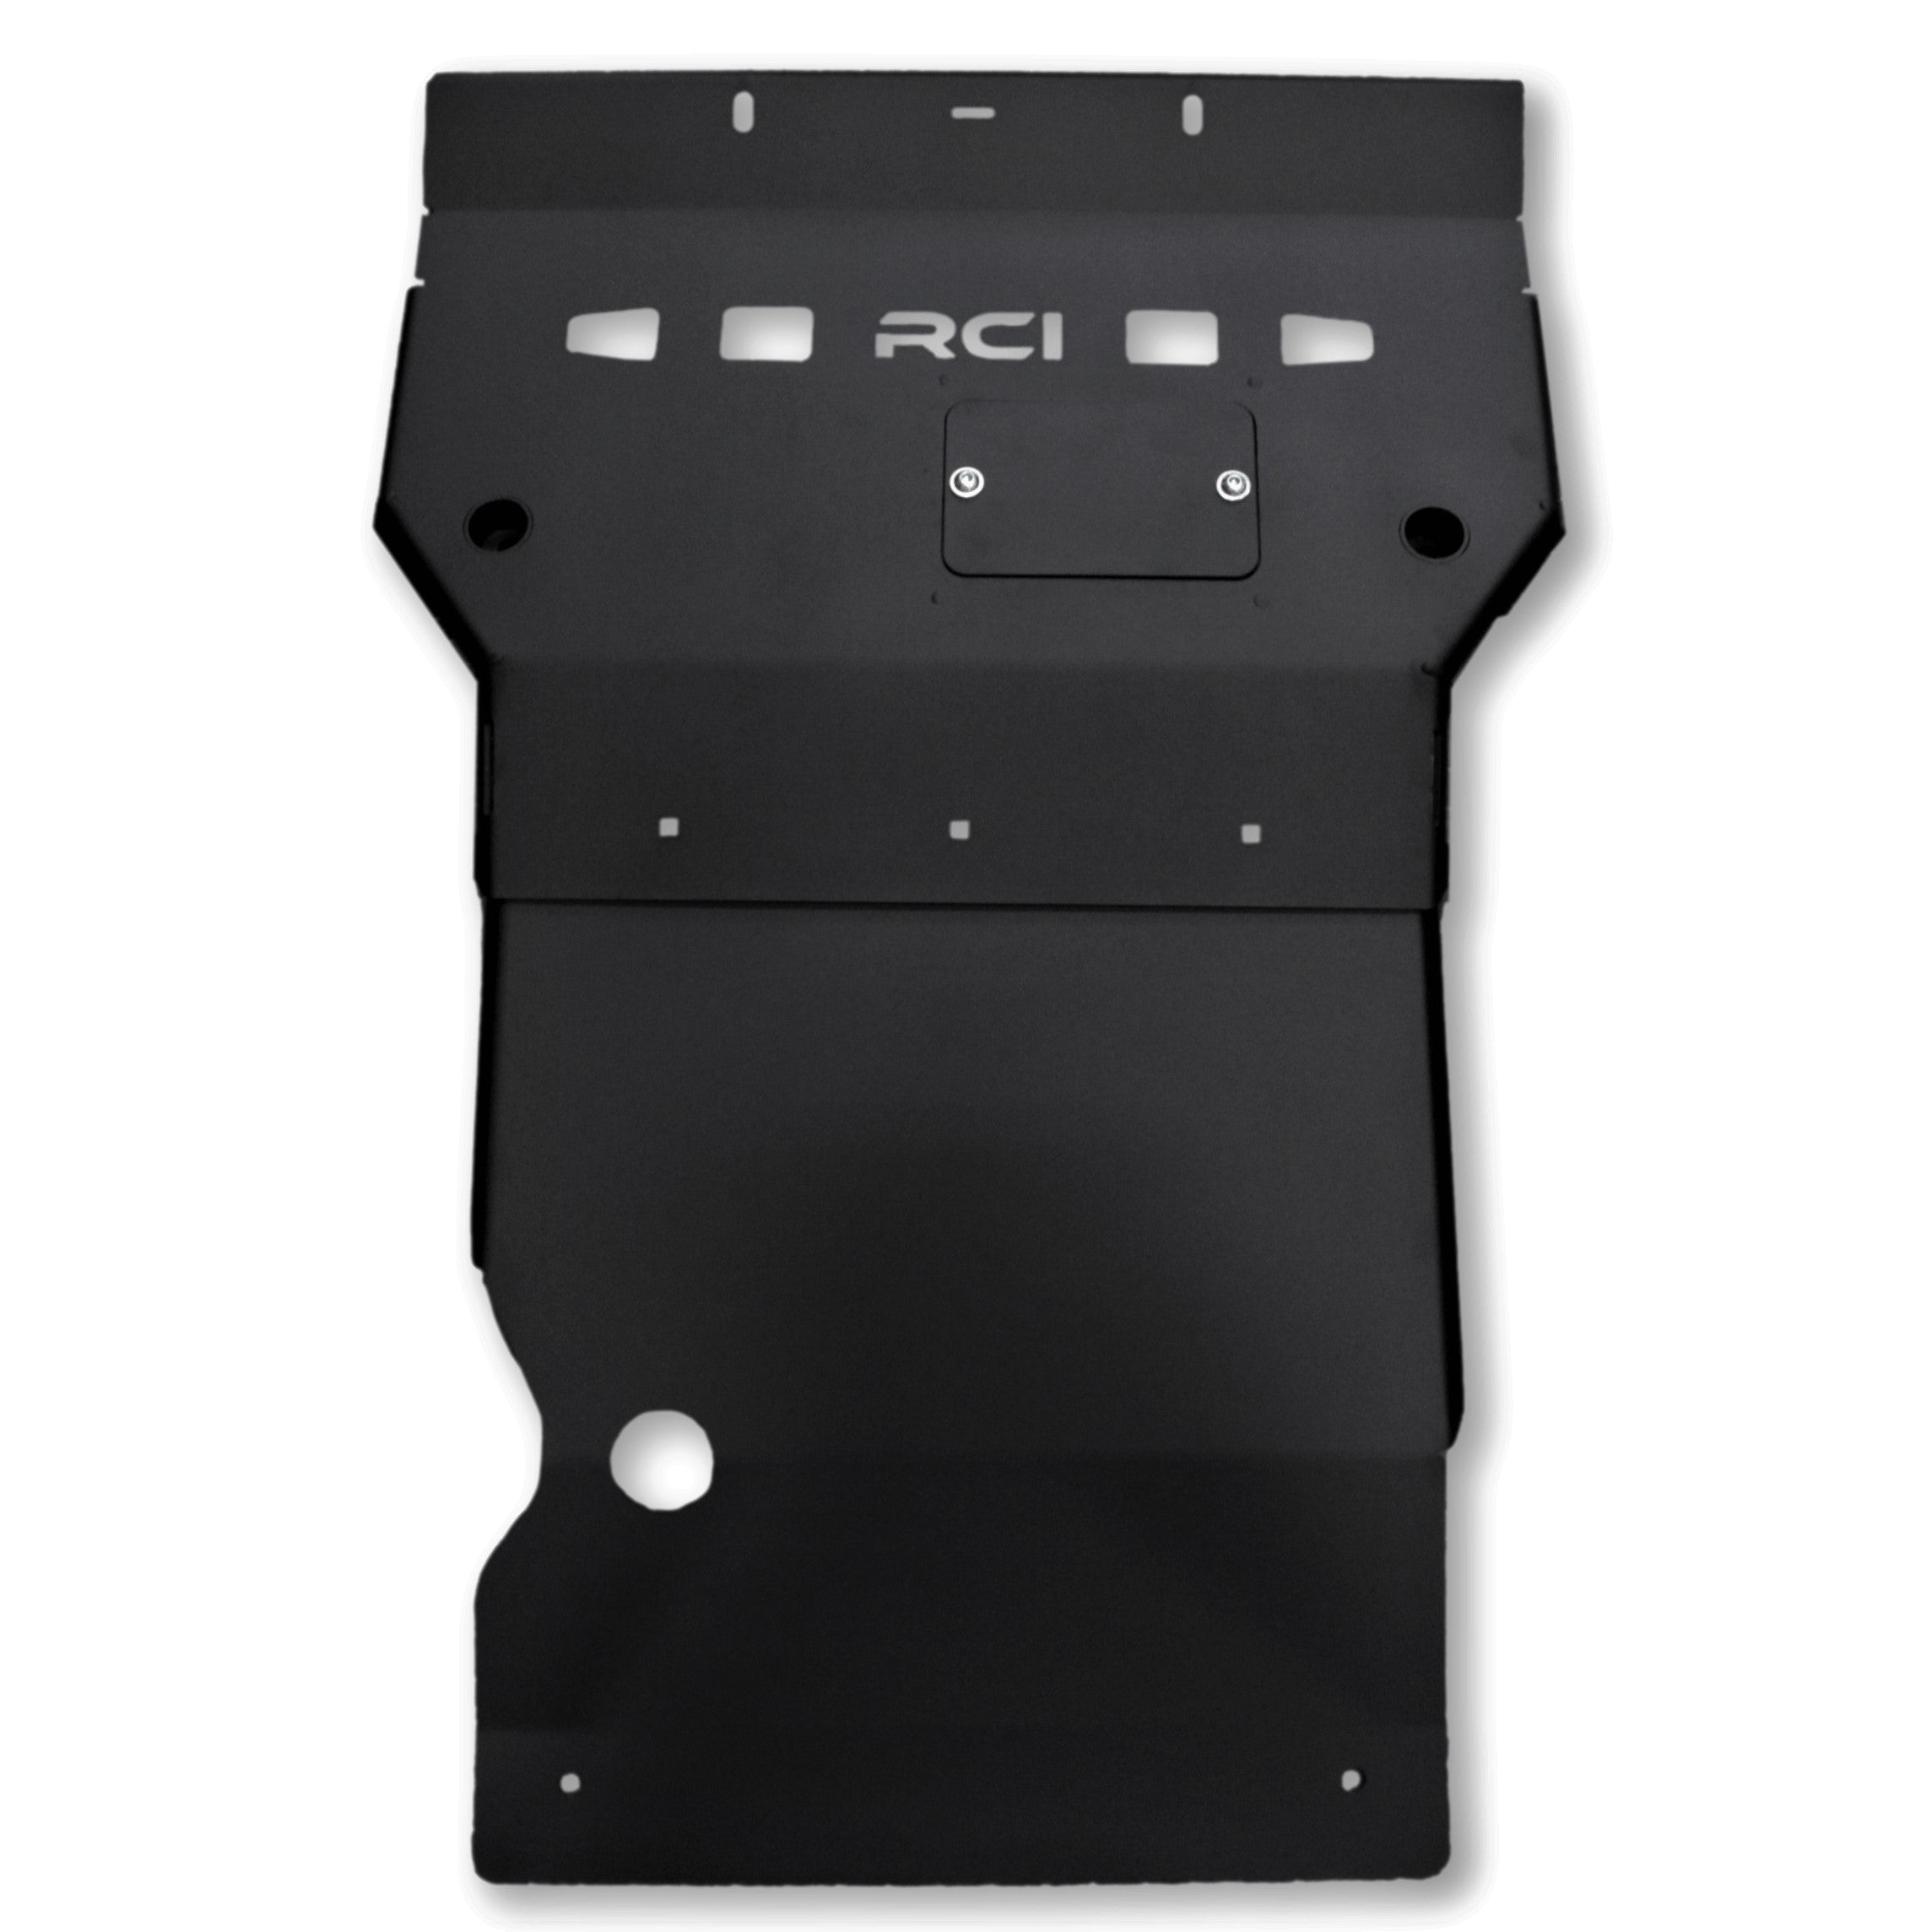 '22-23 Toyota Tundra RCI Off-Road Engine Skid Plate (top view)